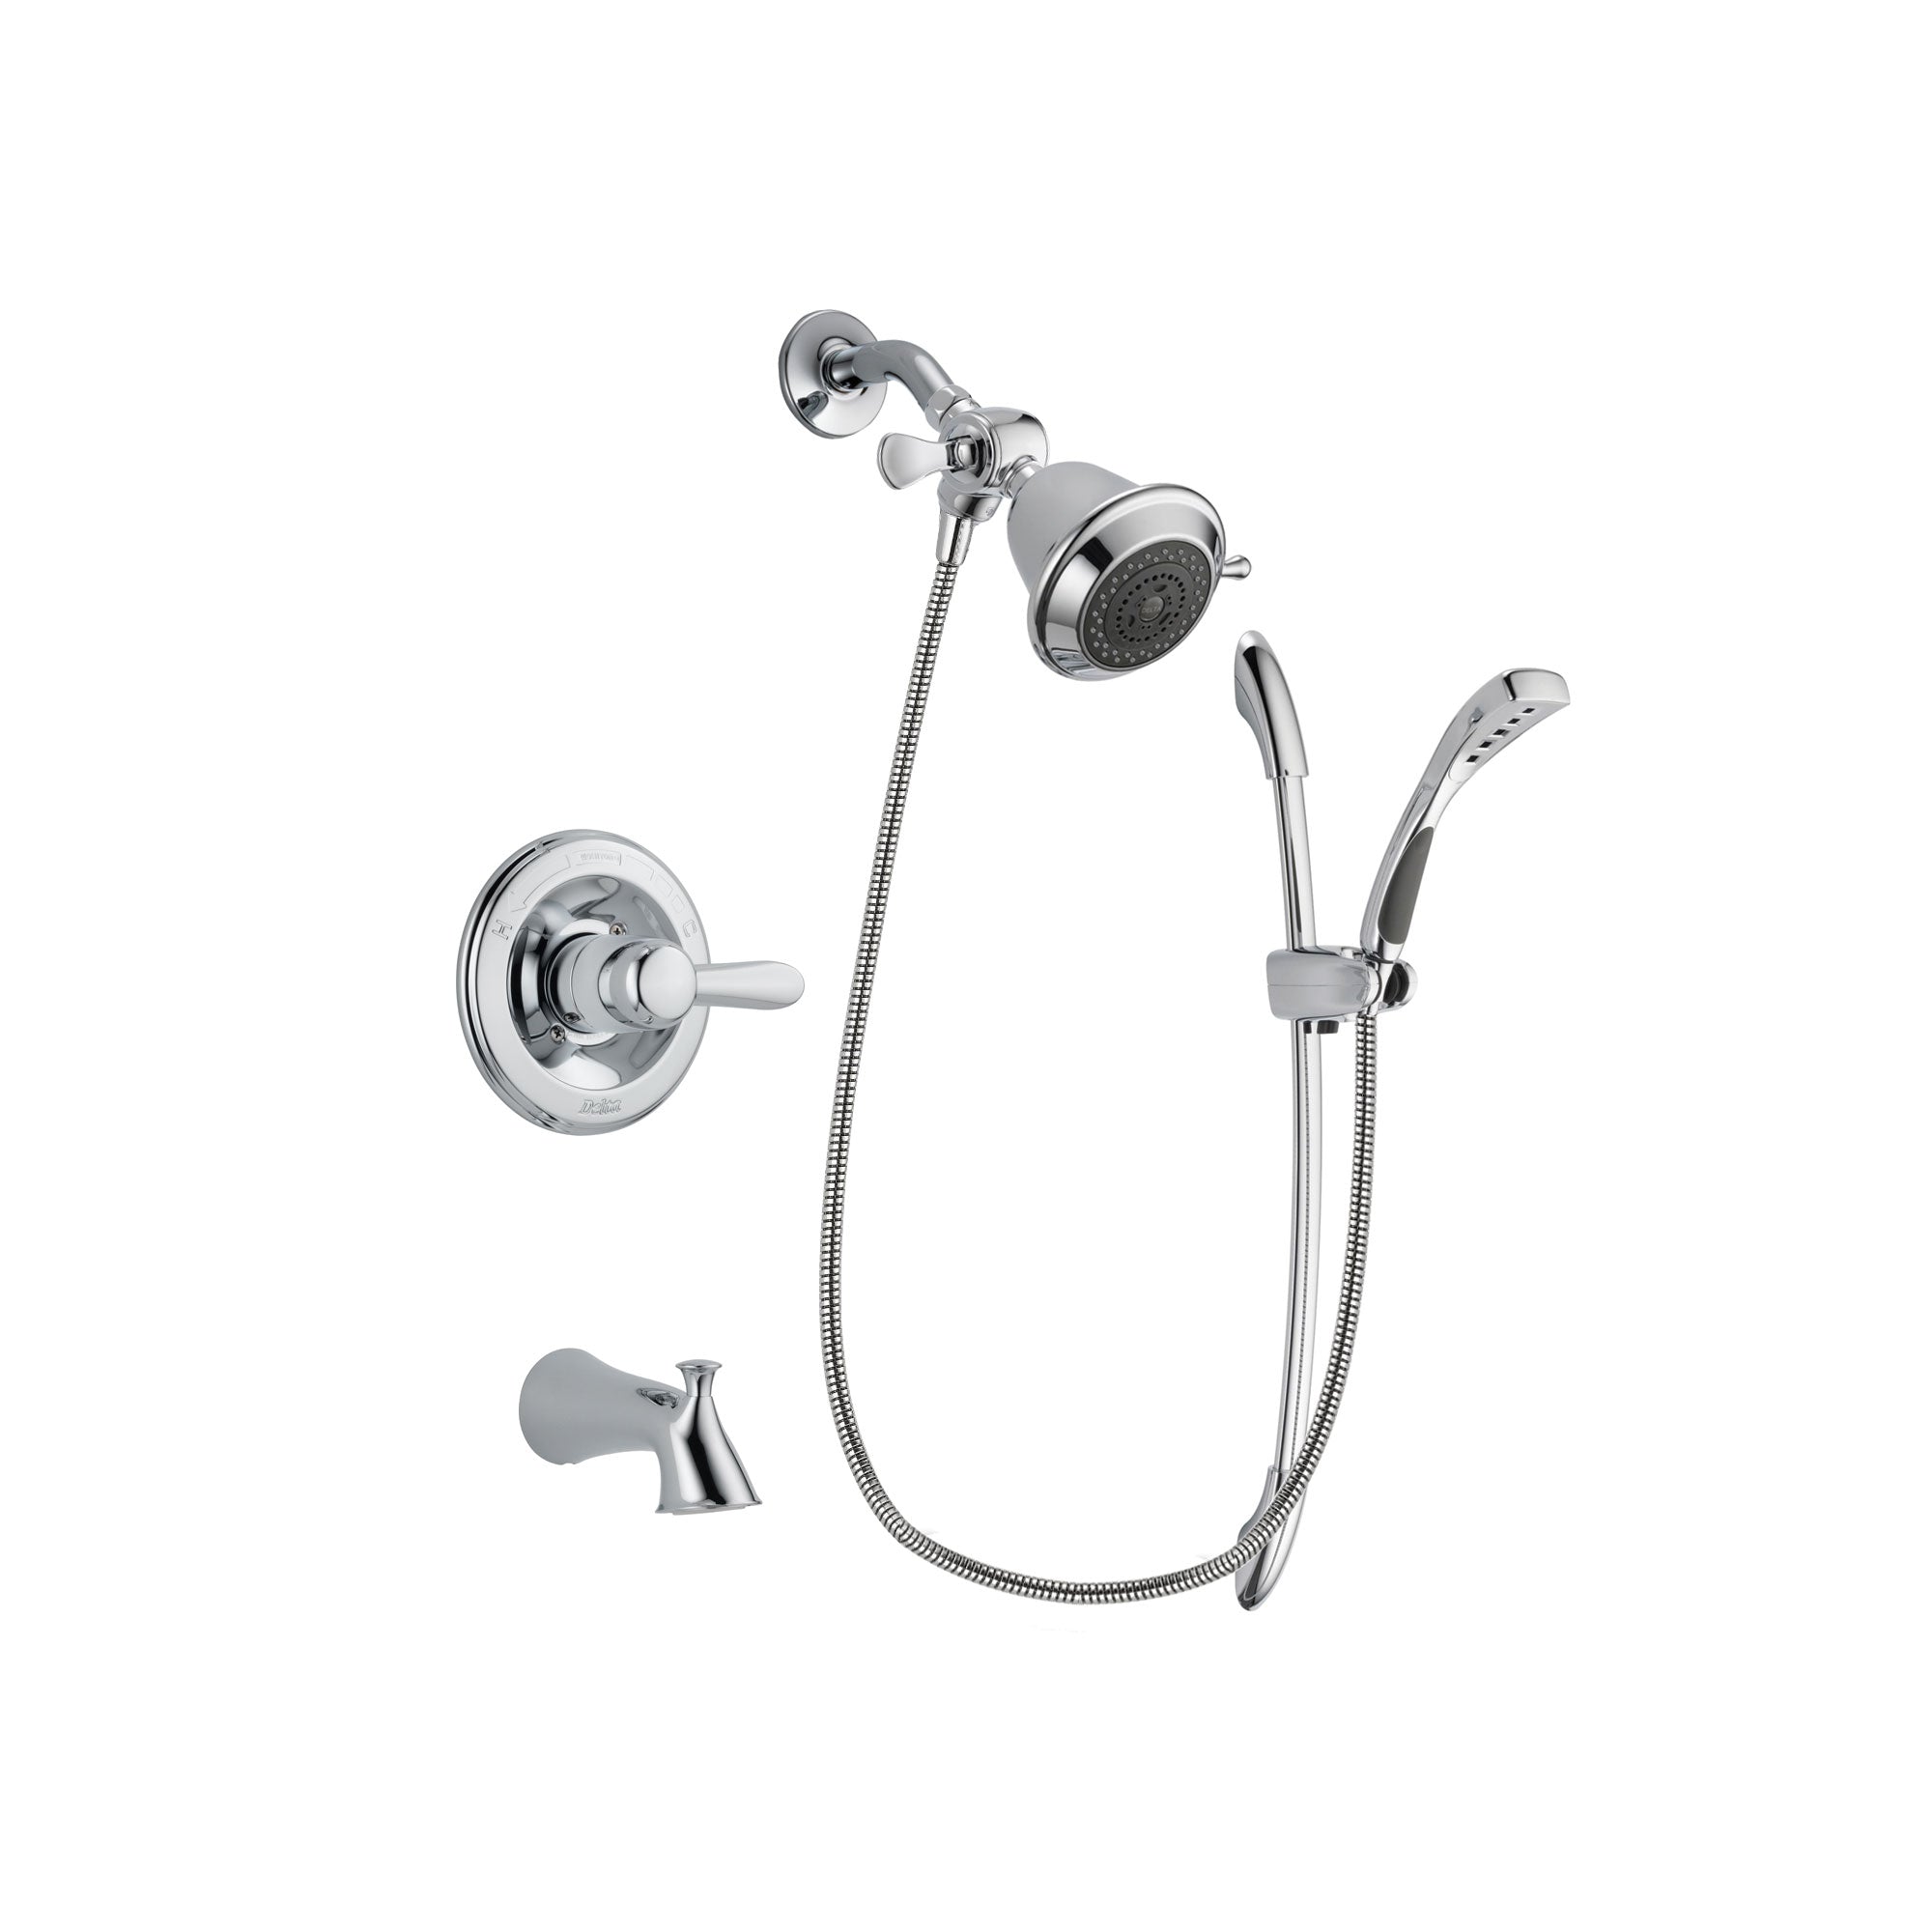 Delta Lahara Chrome Finish Tub and Shower Faucet System Package with Shower Head and Handheld Shower with Slide Bar Includes Rough-in Valve and Tub Spout DSP0435V